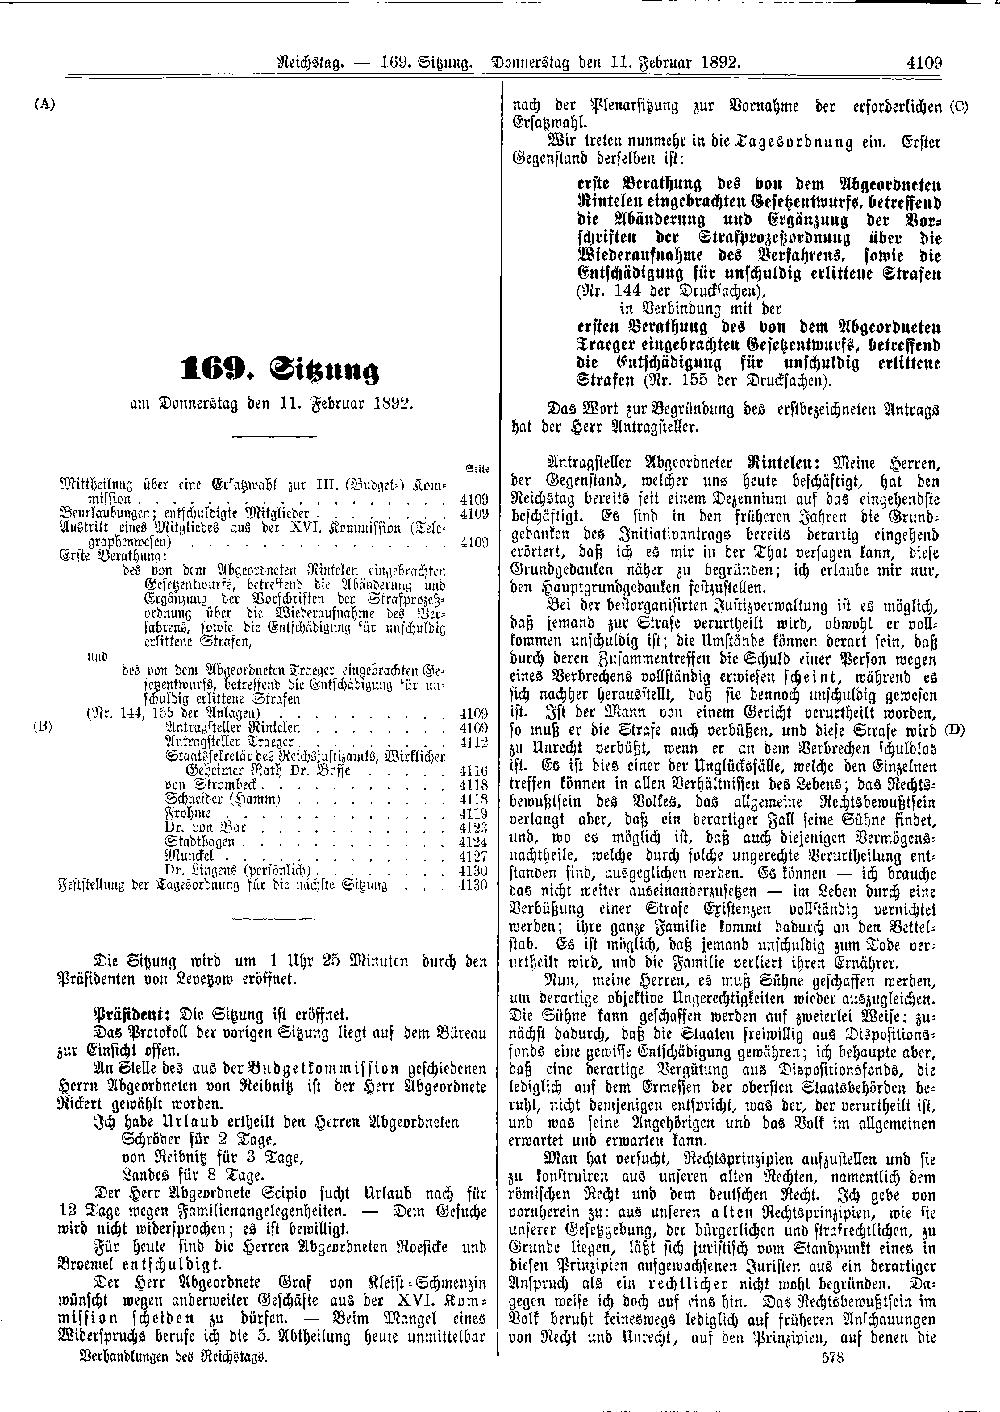 Scan of page 4109